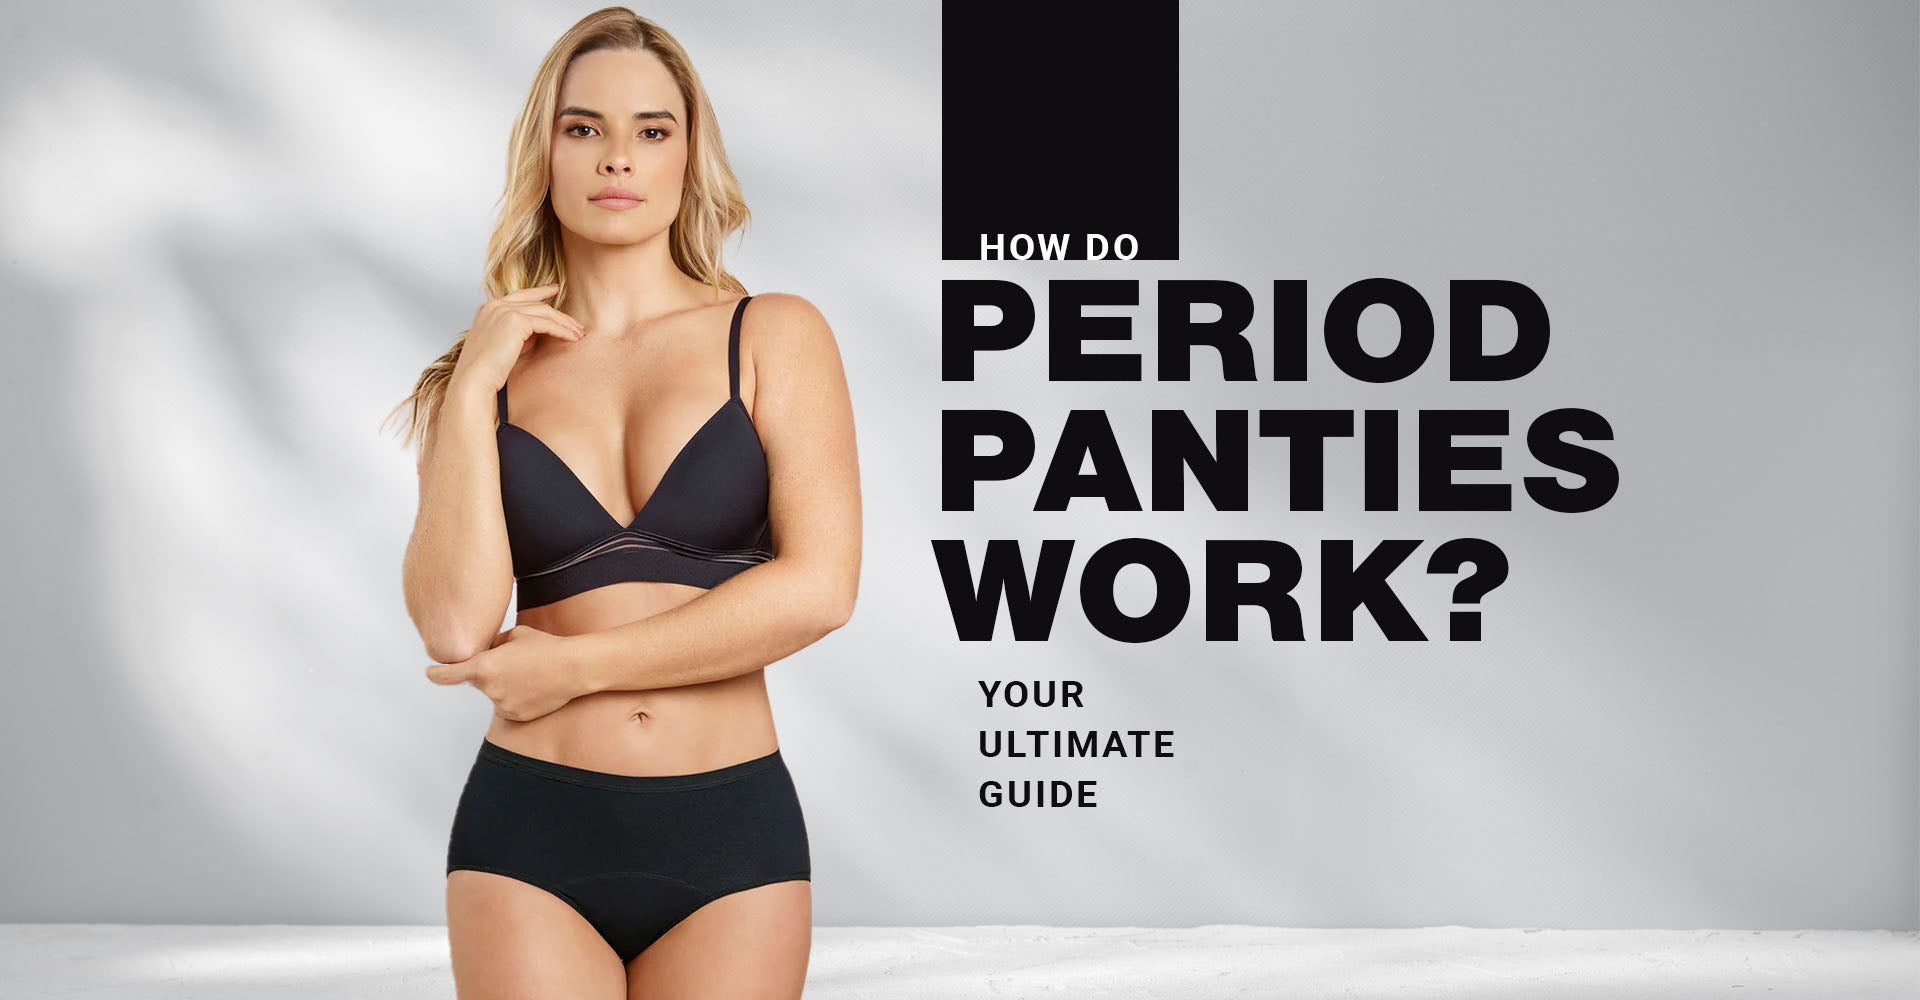 How Our Period Panties Work